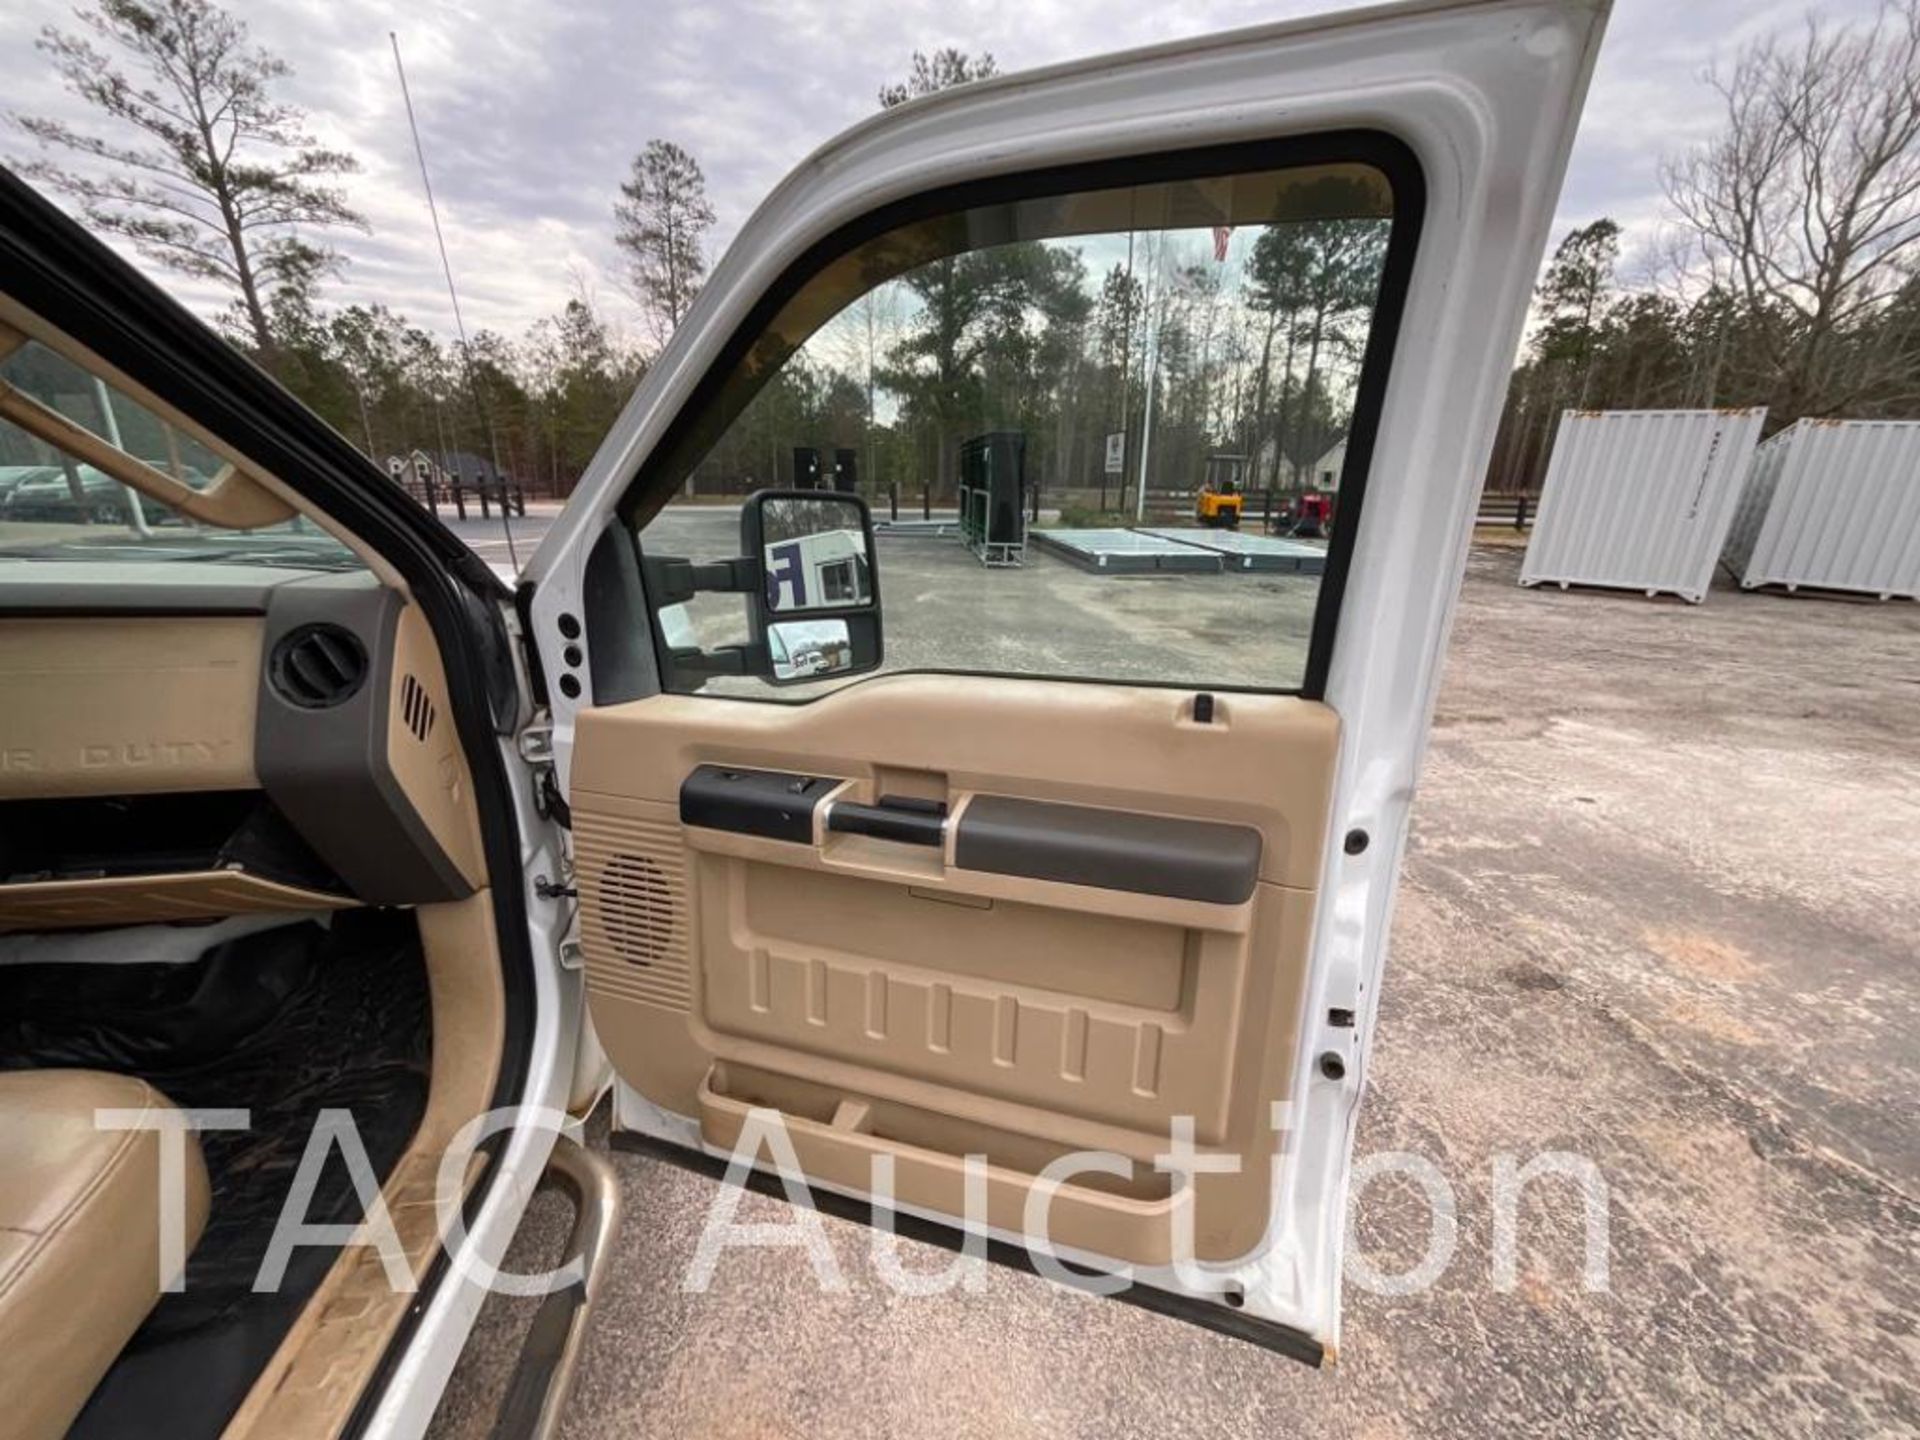 2008 Ford F-350 Super Duty Crew Cab Pickup Truck - Image 16 of 50